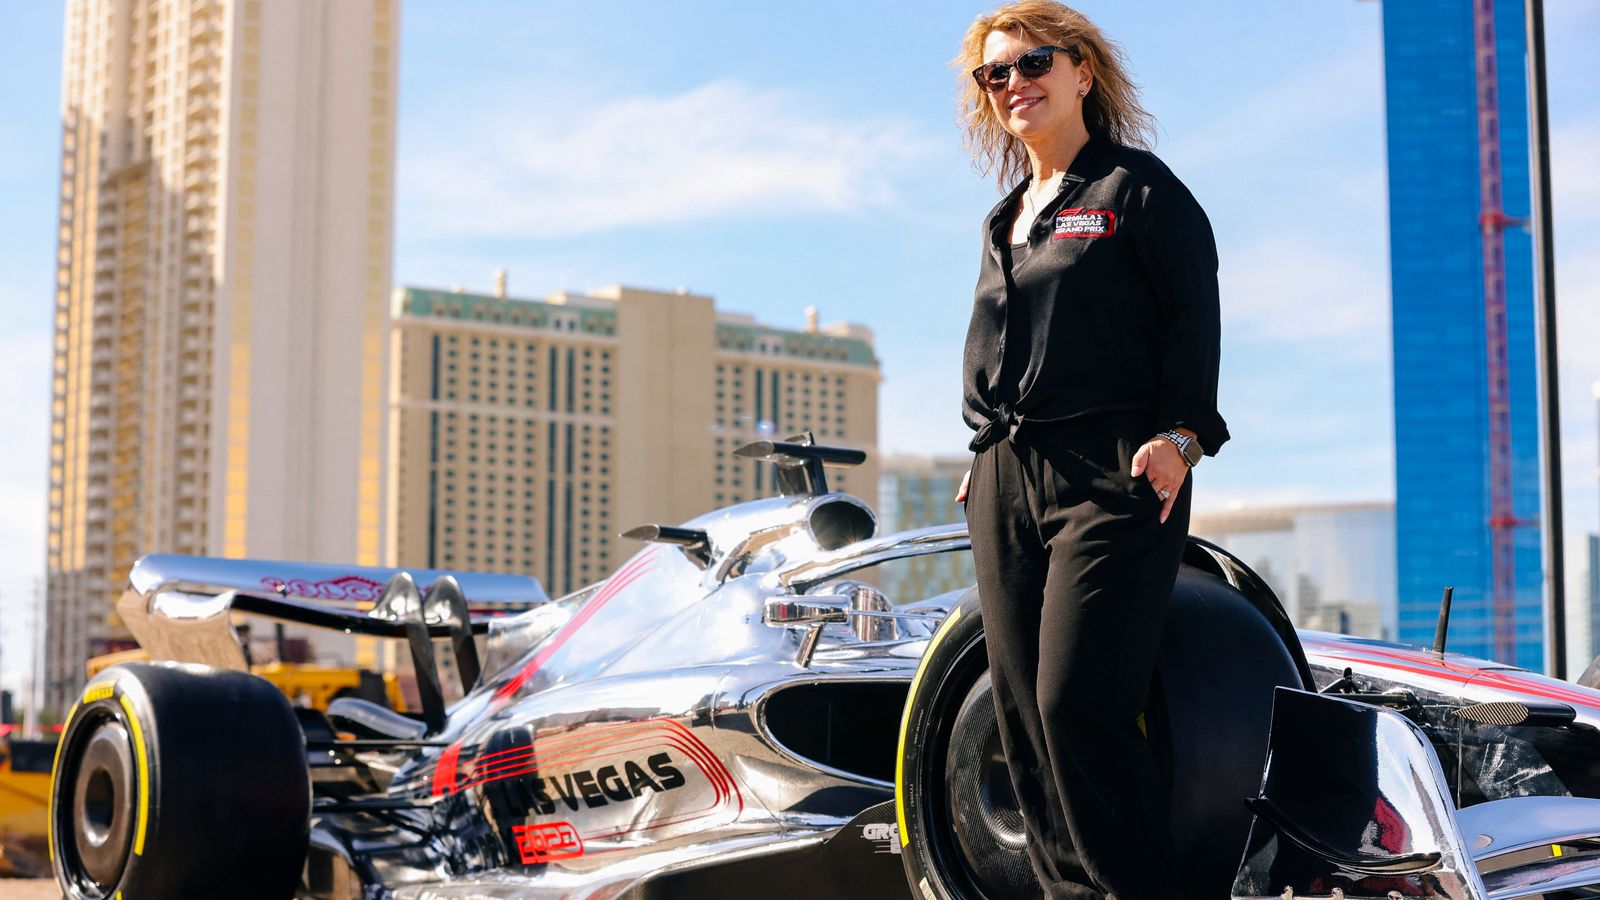 Why Las Vegas GP marks a crucial moment for women in F1